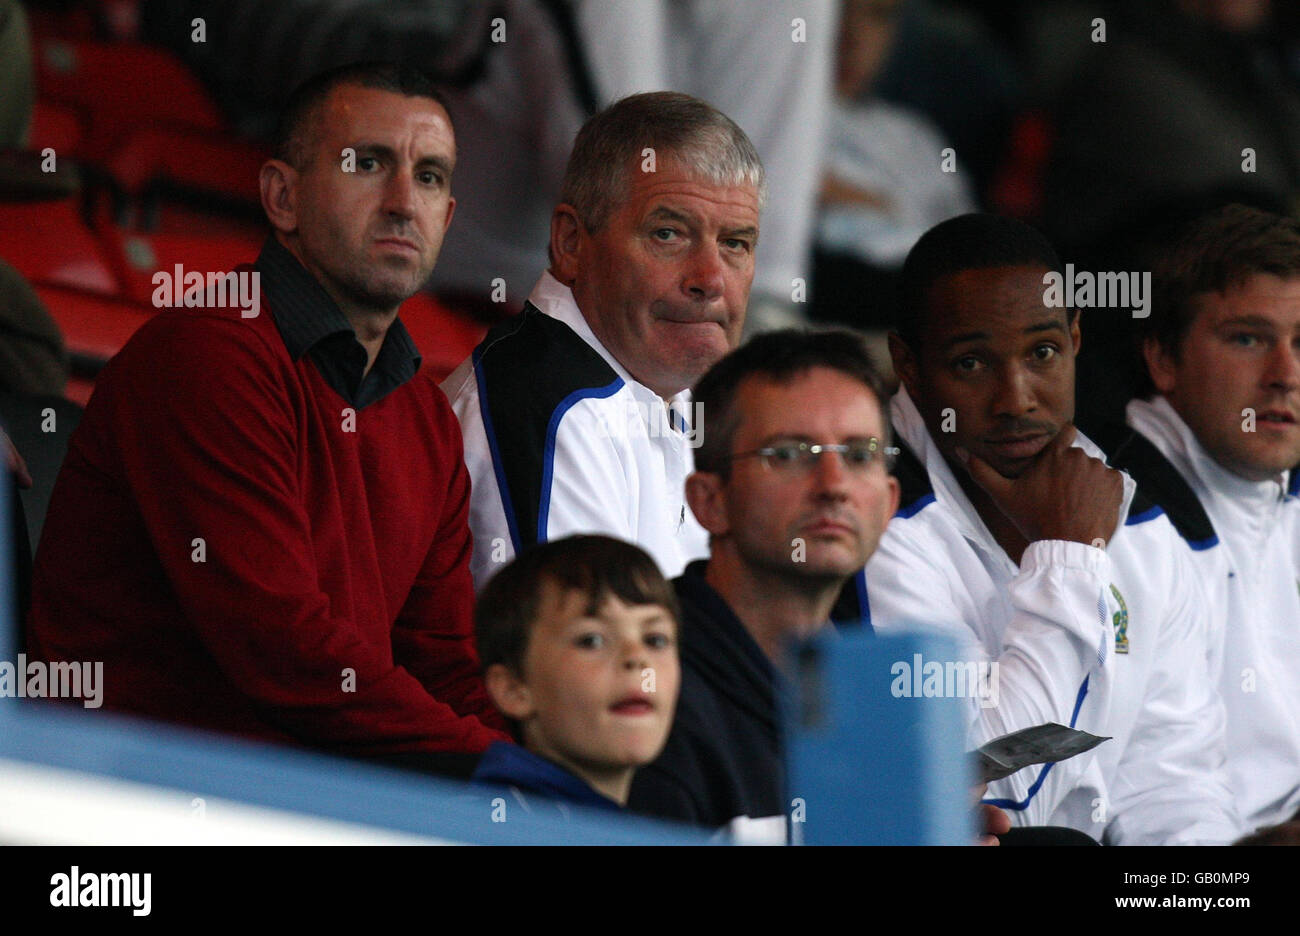 Blackburn's new management team (left to right) Nigel Winterburn, Archie Knox and Paul Ince watch the Pre-Season Friendly match at the Moss Rose Stadium, Macclesfield. Stock Photo